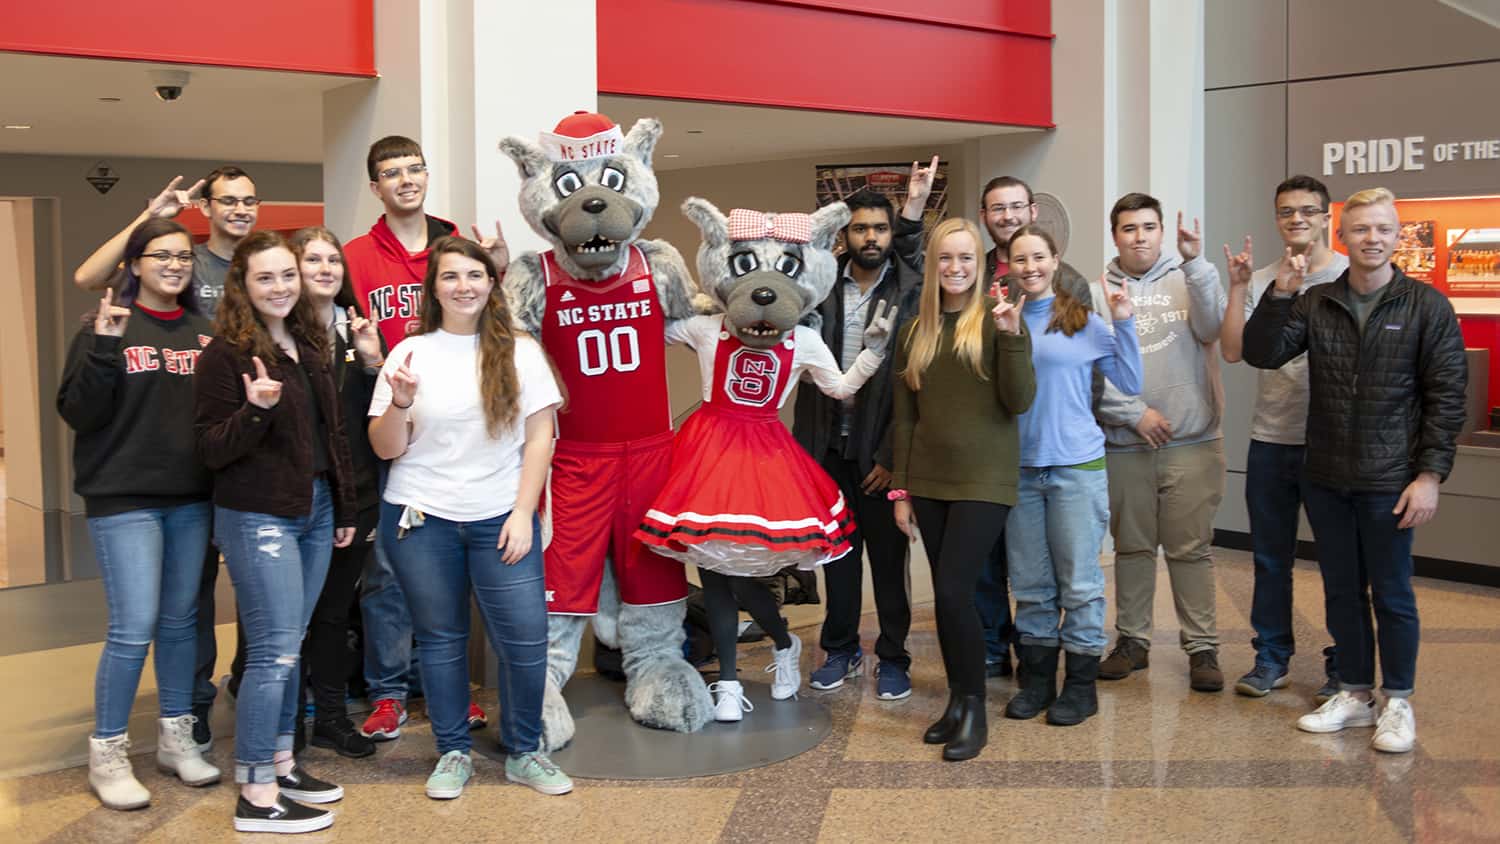 The Solomon Scholars pose with Mr. and Ms. Wuf in Reynolds Coliseum